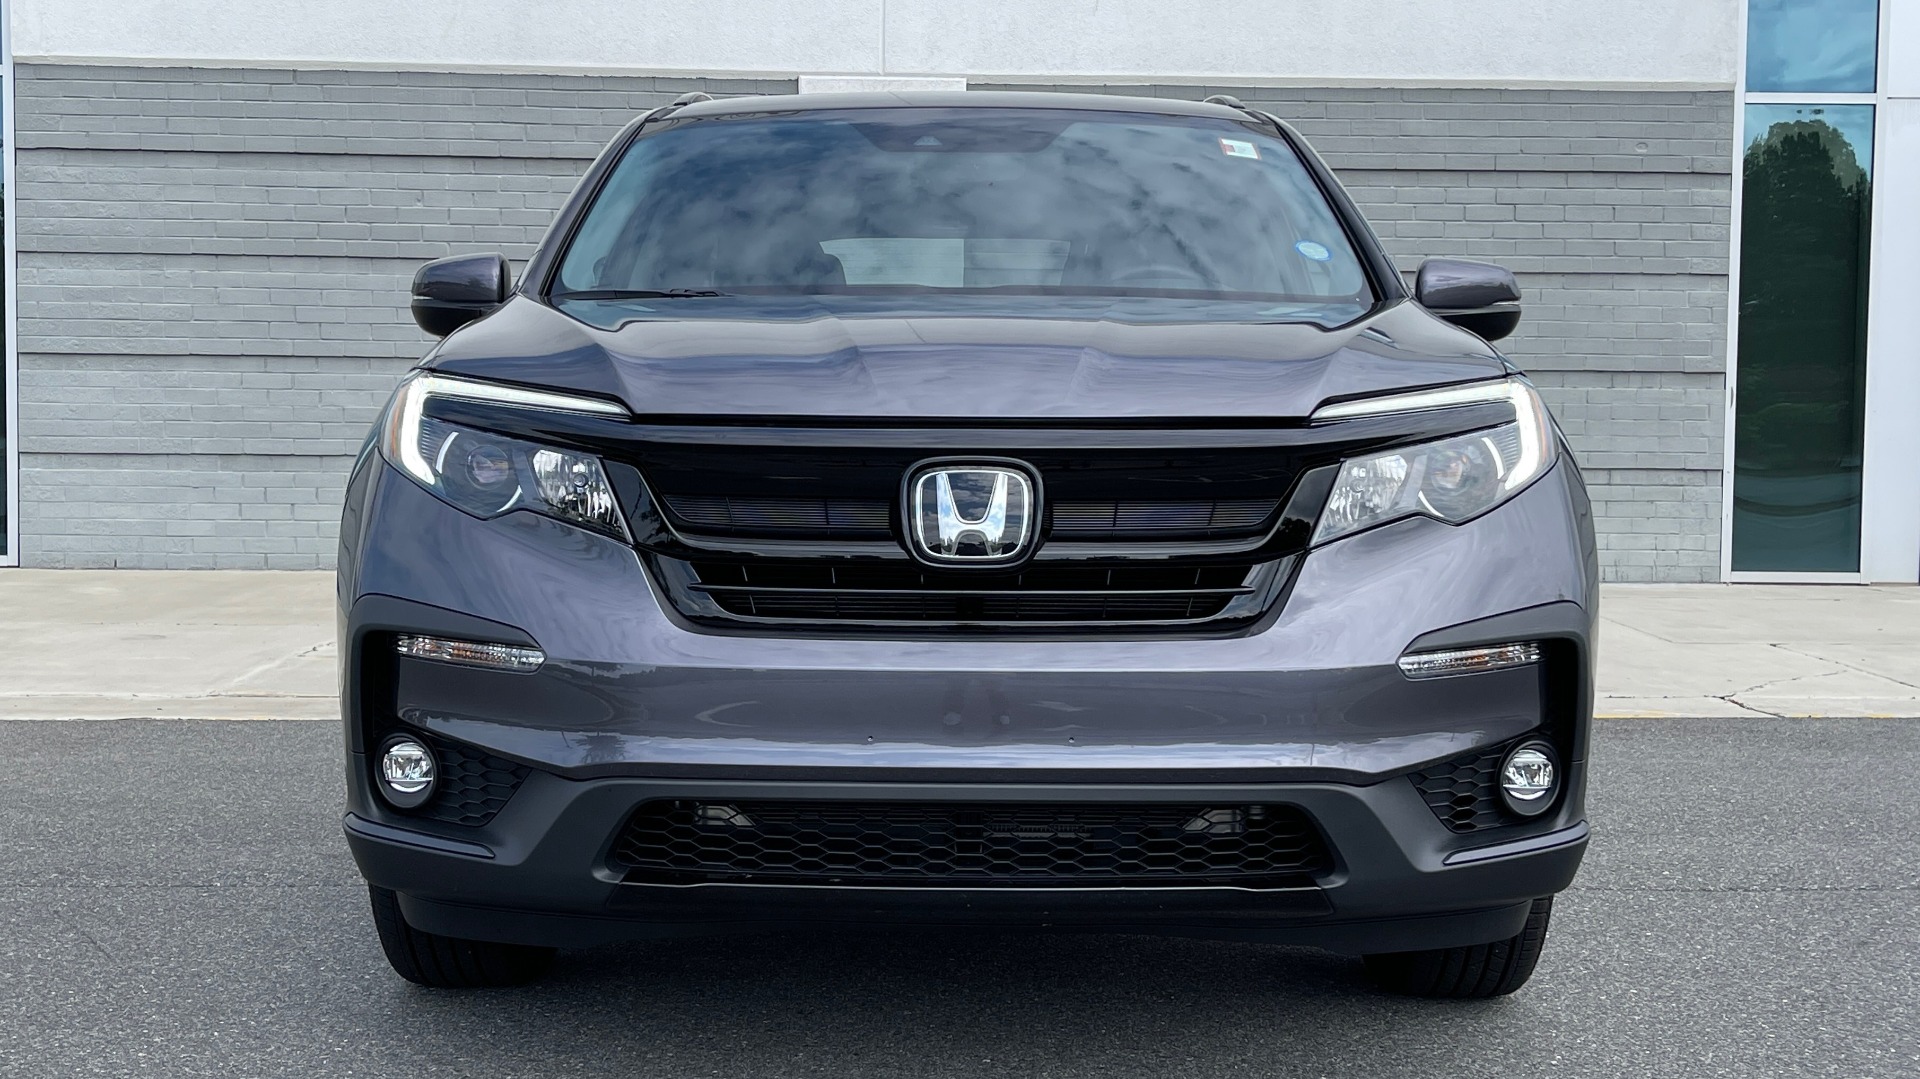 Used 2021 Honda PILOT SE / 3.5L V6 / 9-SPD AUTO / SUNROOF / 3-ROW / REARVIEW for sale Sold at Formula Imports in Charlotte NC 28227 4